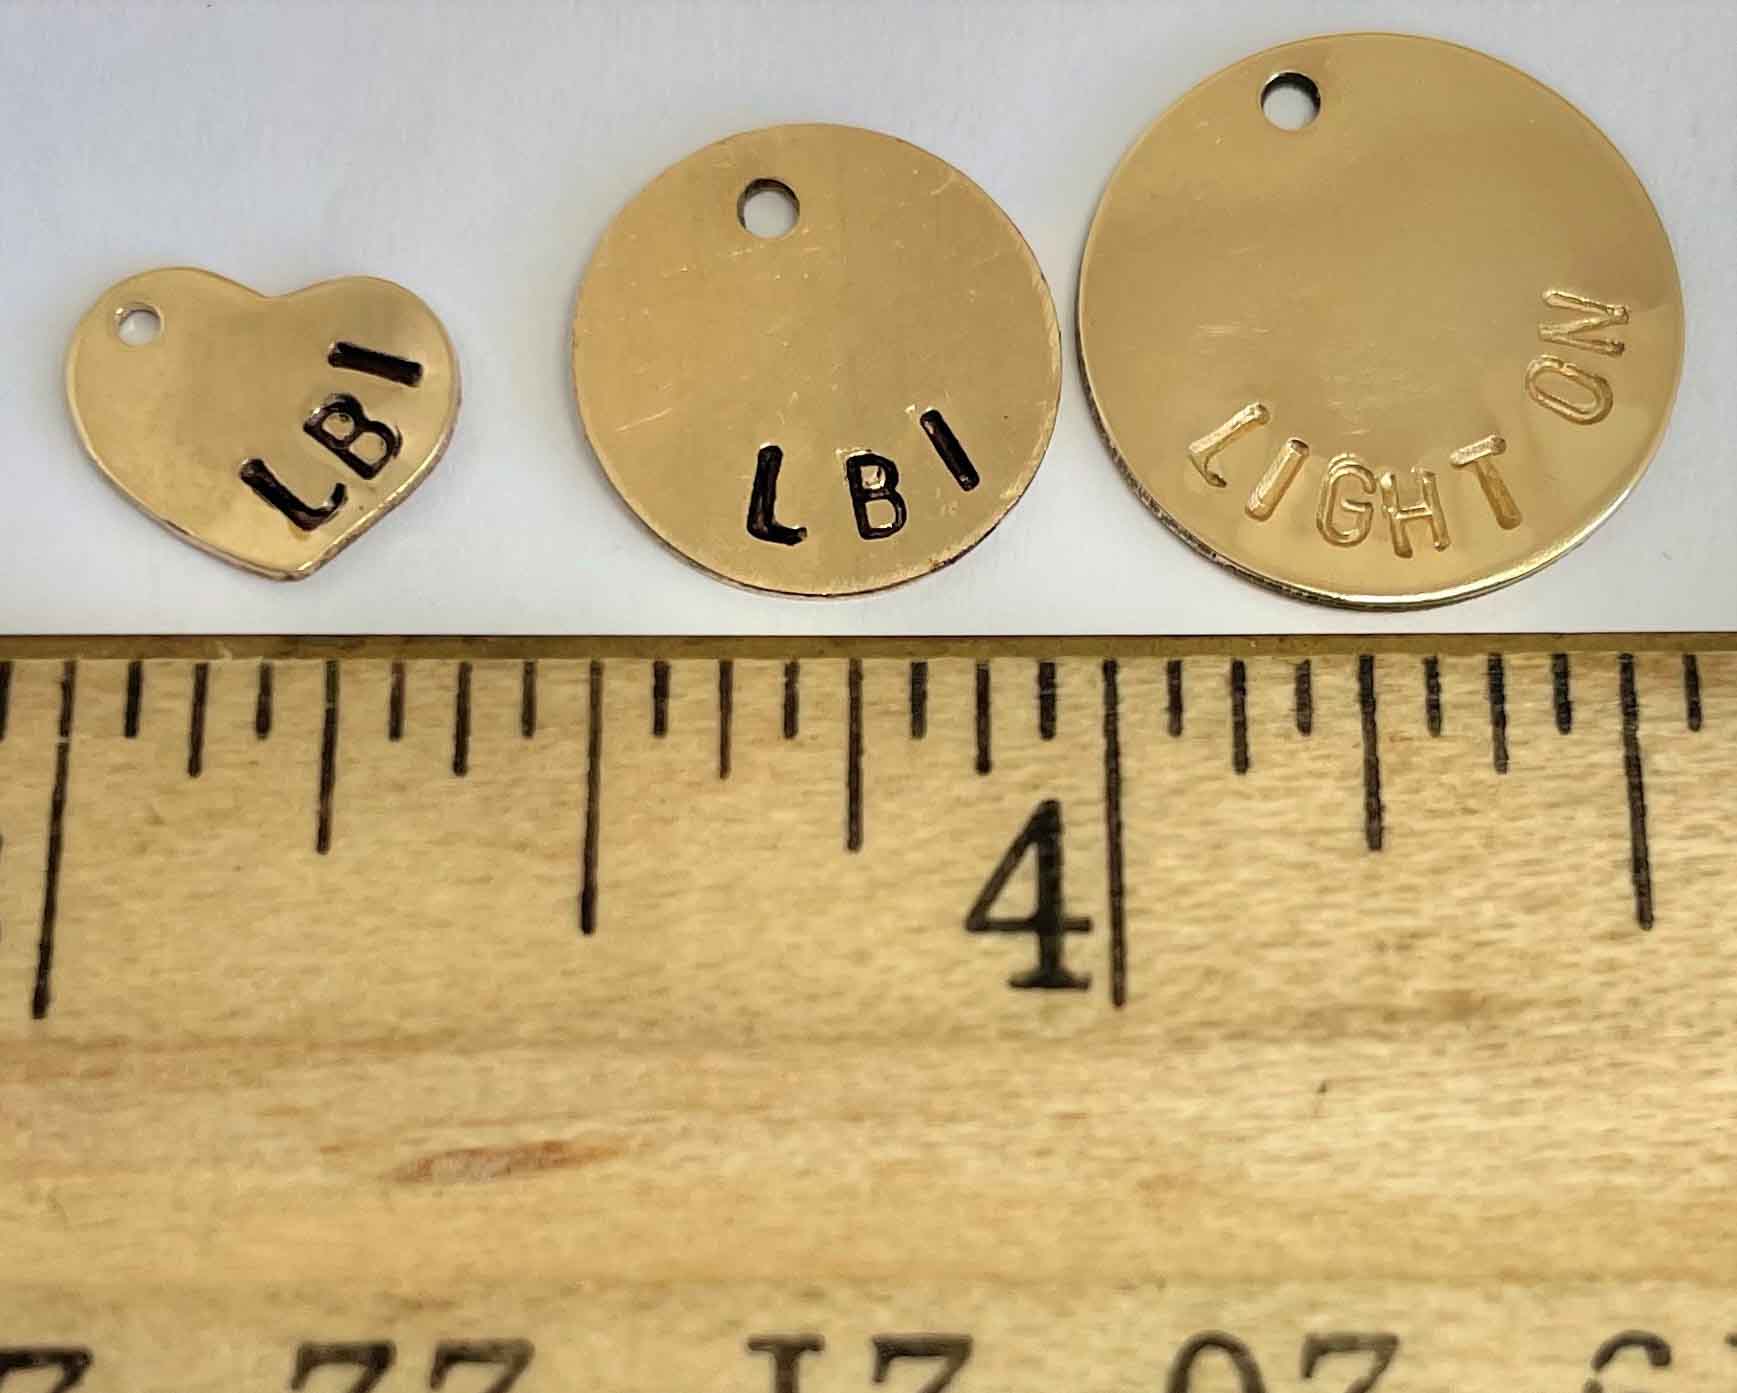 Custom Hand Stamped Disc ONLY/ Hand Stamp Gold Filled Charms Personalized  to your Specifications